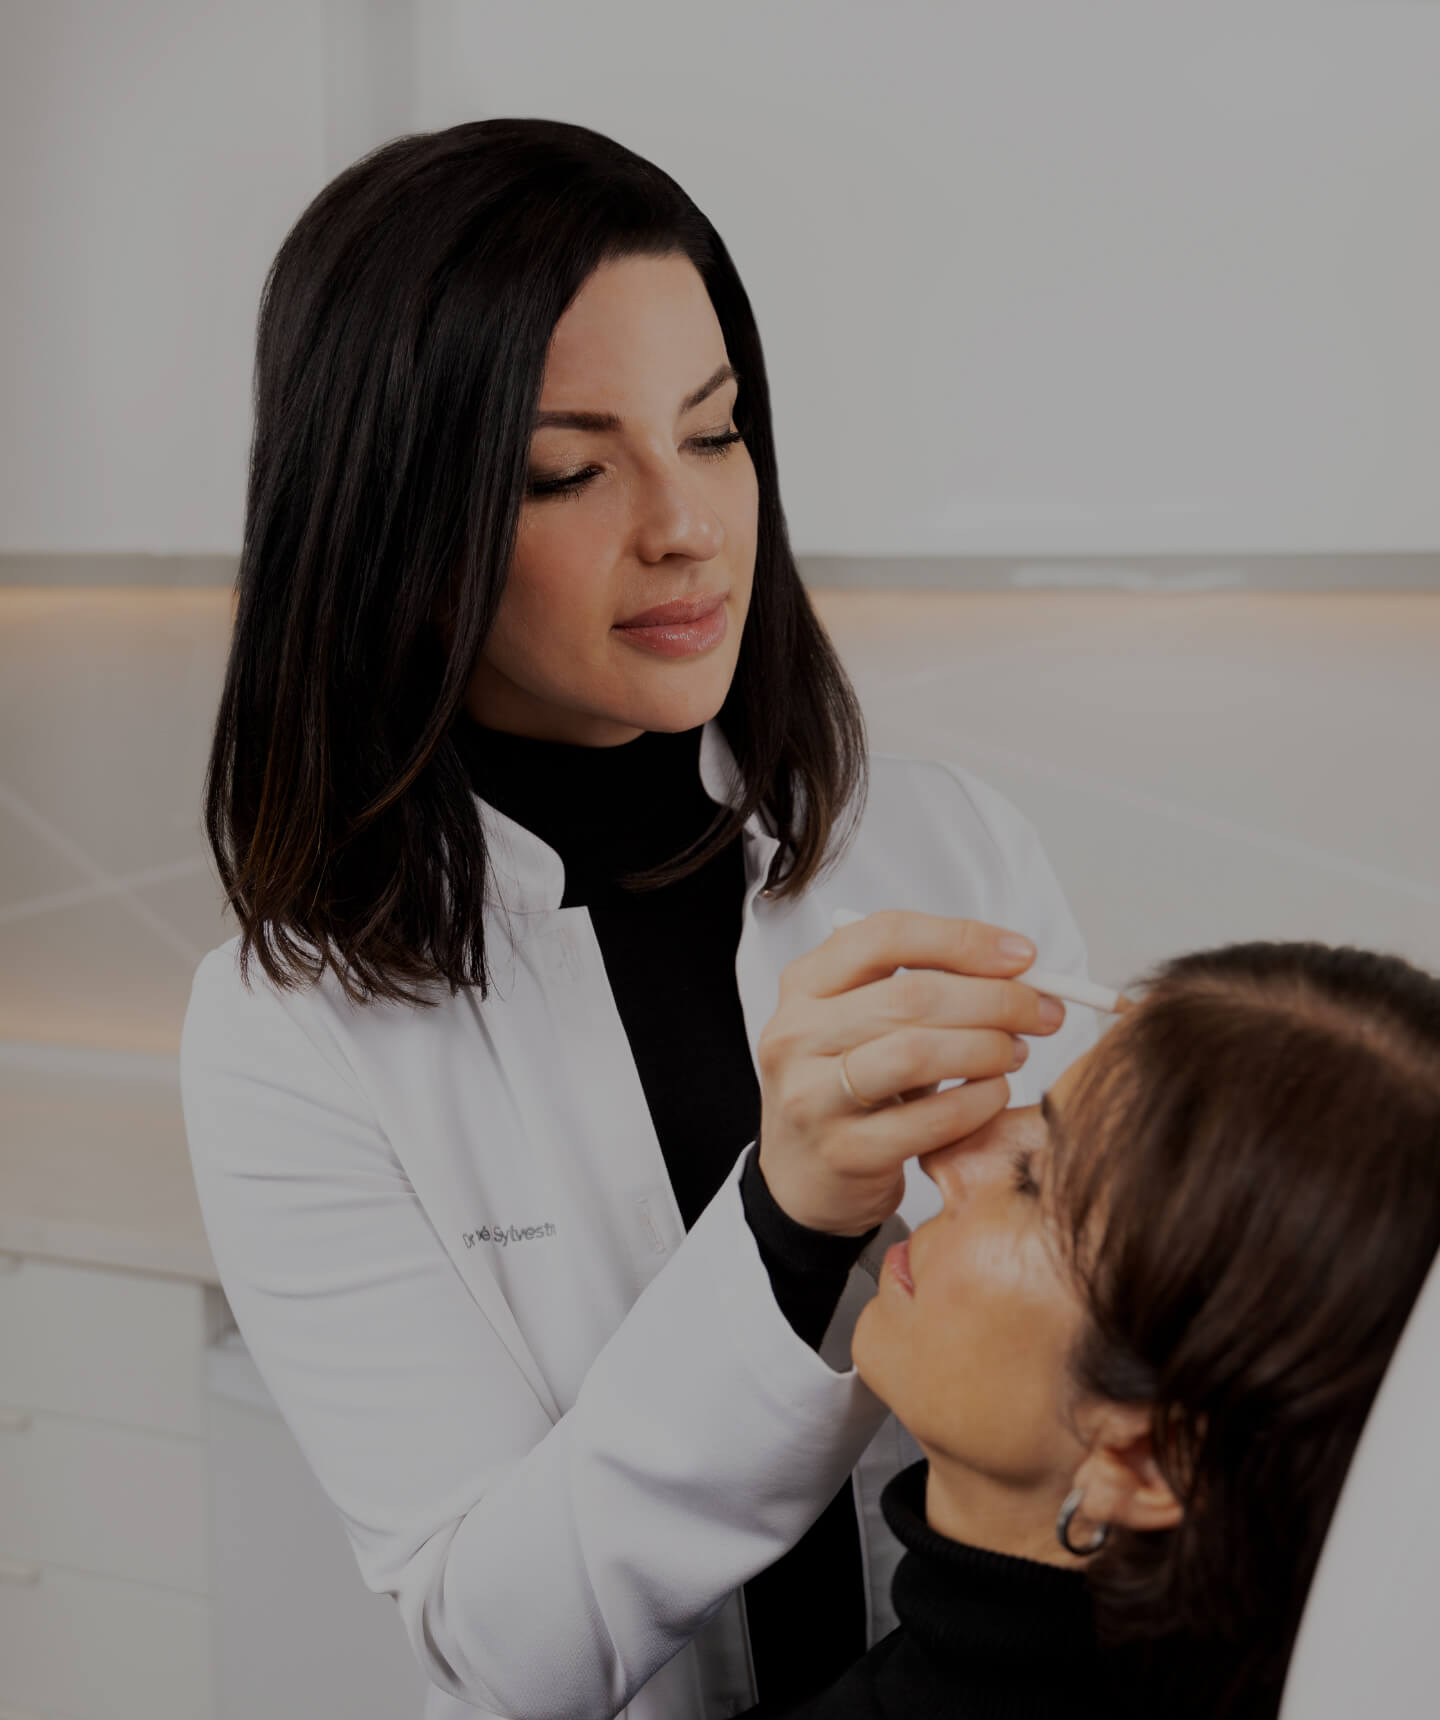 Dr. Chloé Sylvestre doing markings in preparation of a neuromodulator injection treatment on the forehead of a female patient